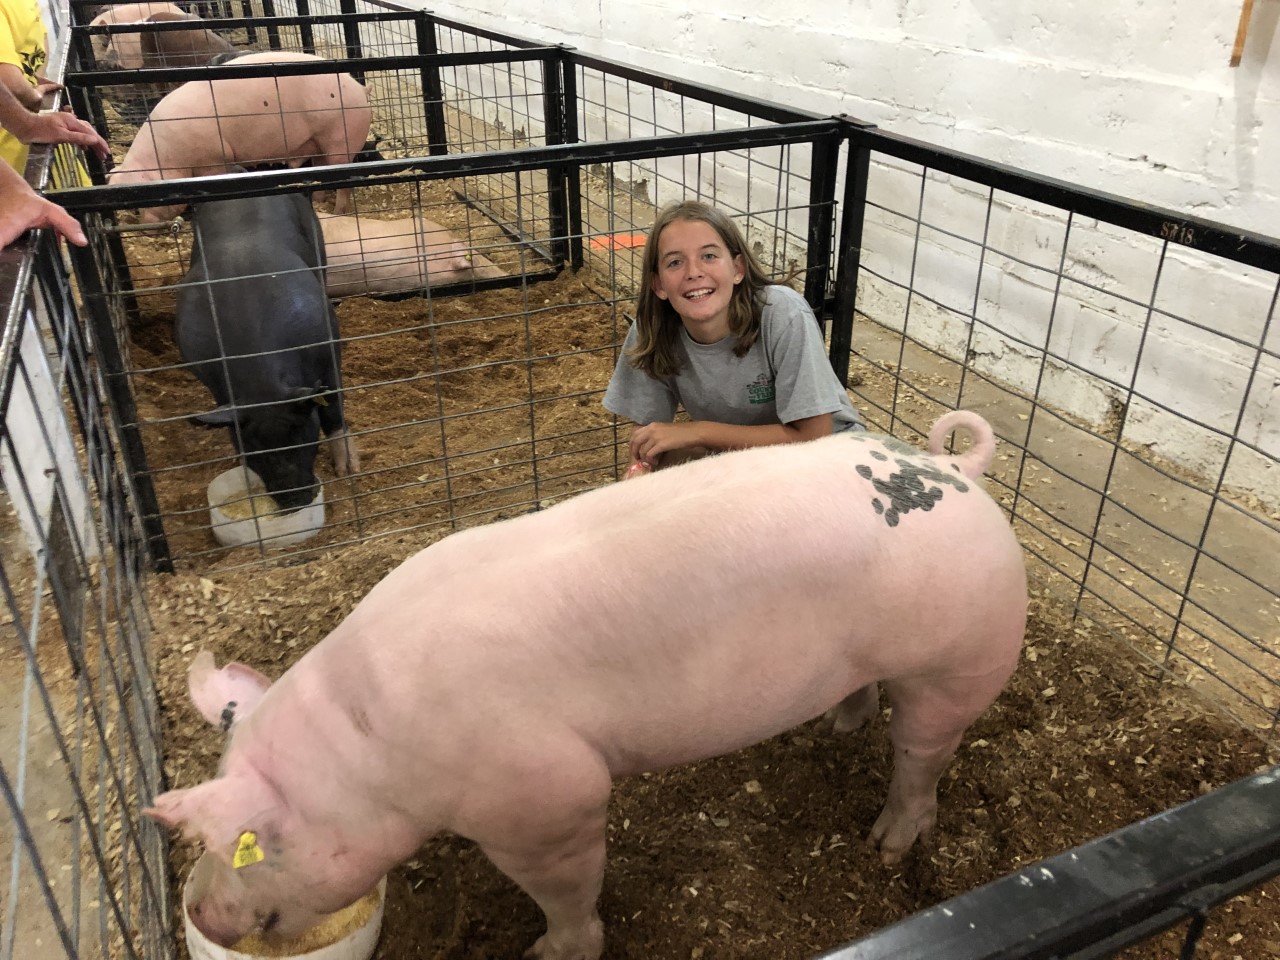 2019 Bay County Fair, Reserve Champion Market Hog, Sired by Keg Stand, Bred by Humprey's Healthy Hogs